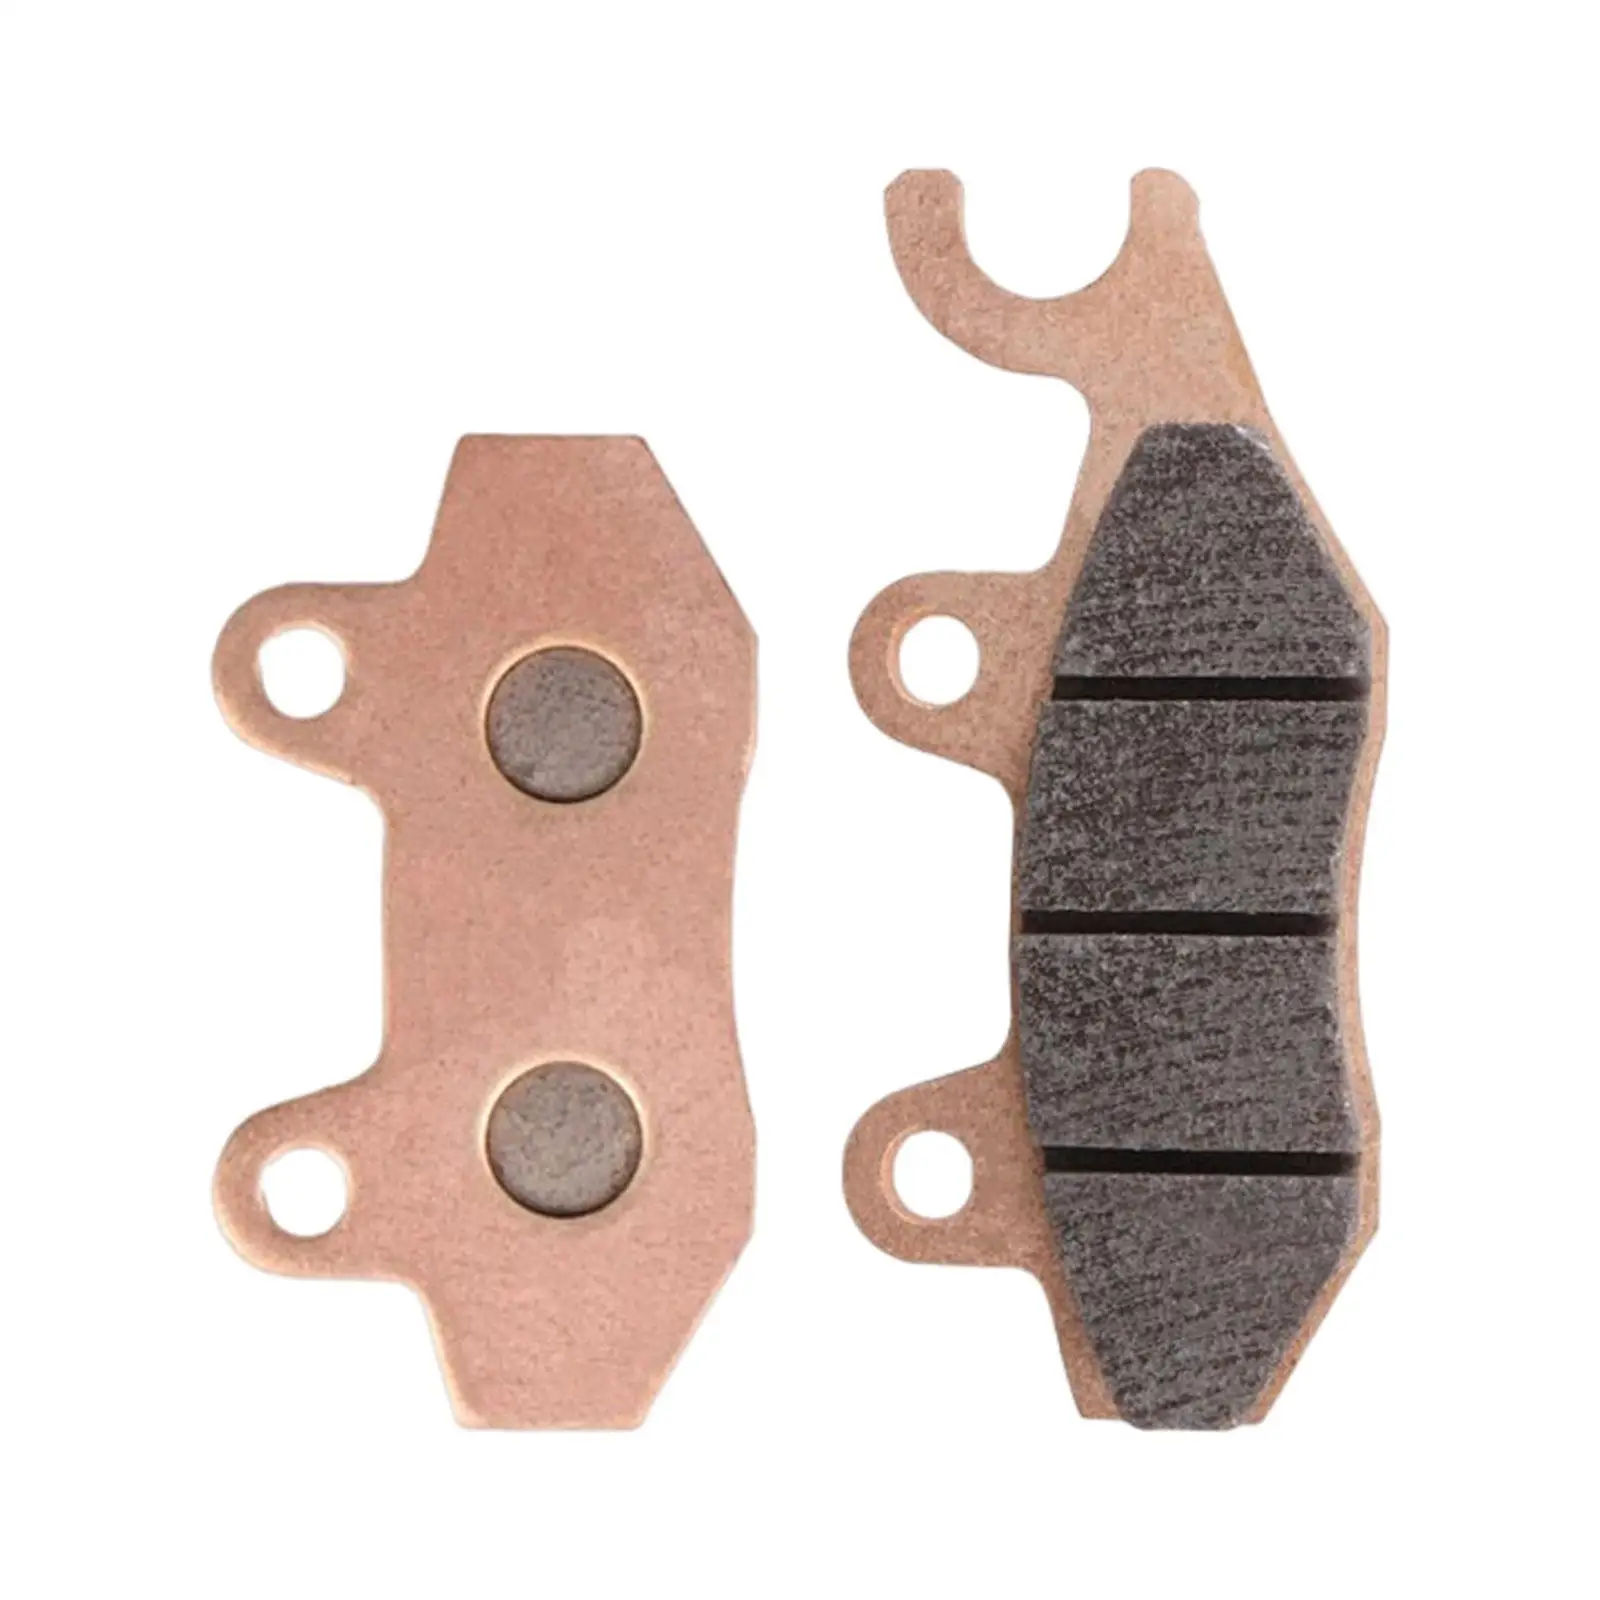 Motorcycle Brake Pads Set Sintered Copper based Accessories Sturdy for Ninja 250R EX300 Z300 Convenient Installation